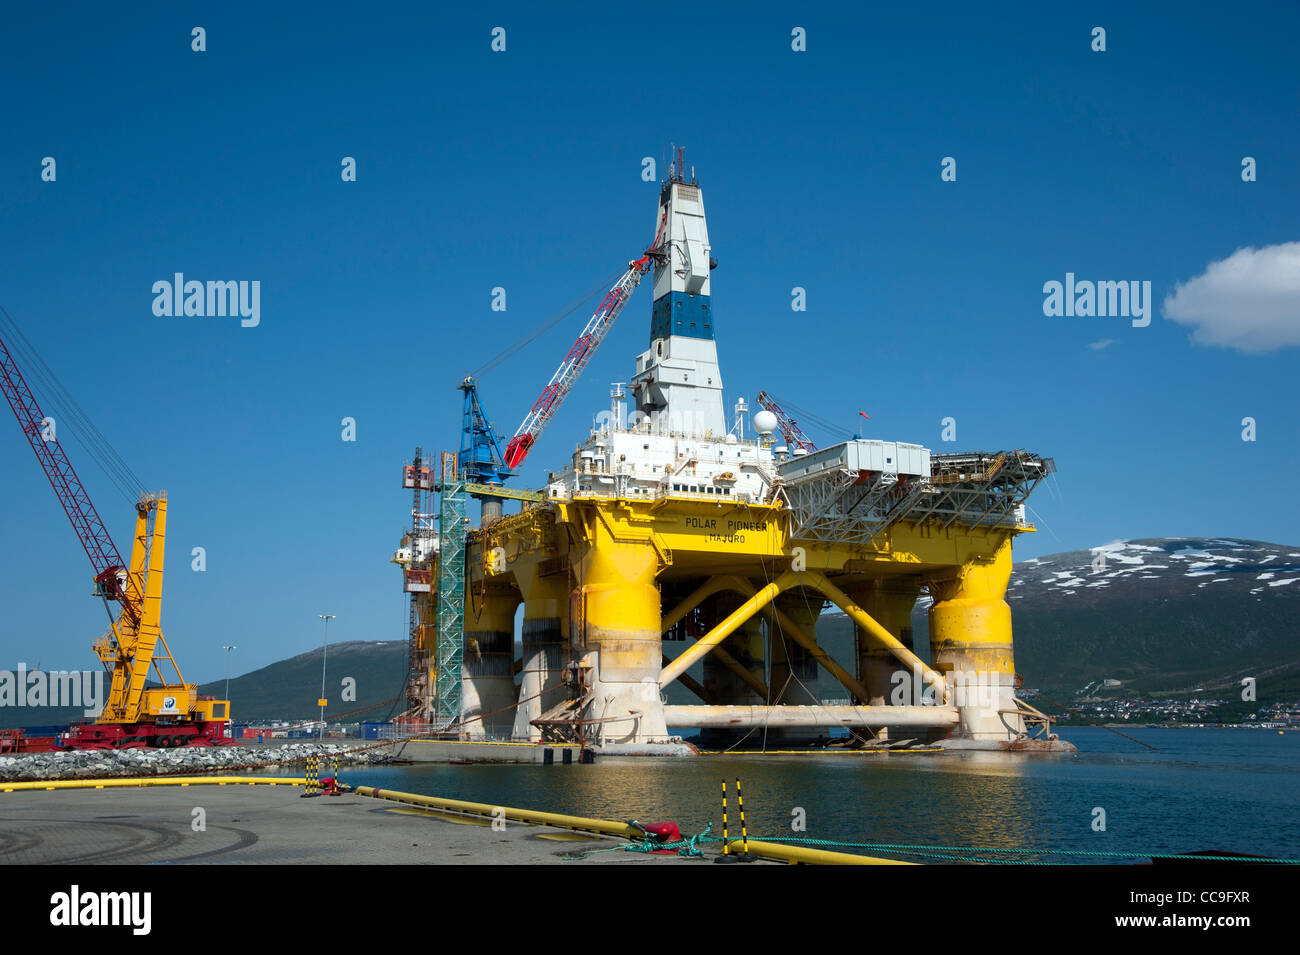 The Polar Pioneer, a mobile oil rig, anchored in the port of Tromsø Stock Photo